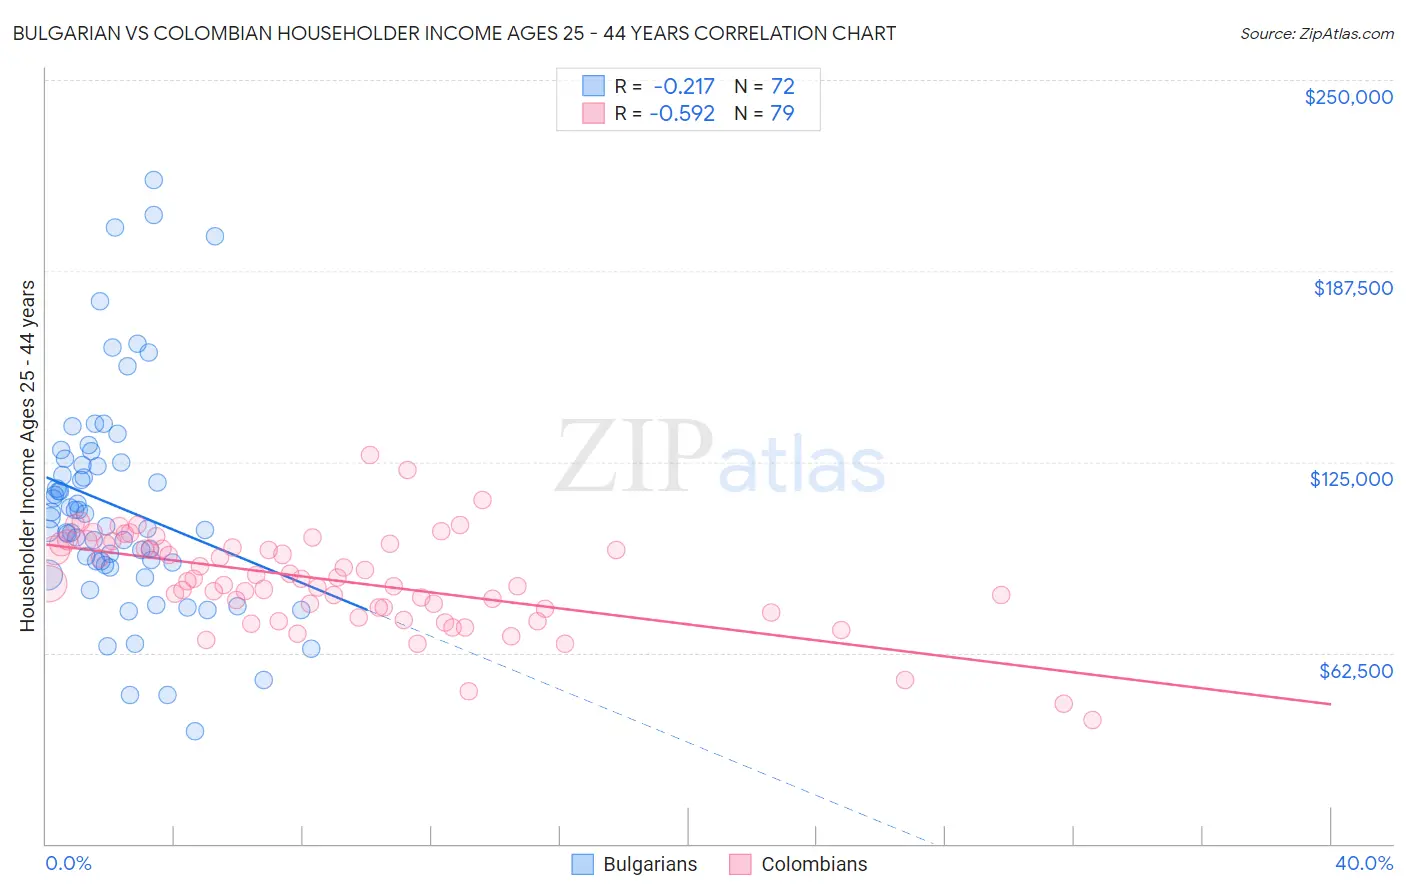 Bulgarian vs Colombian Householder Income Ages 25 - 44 years